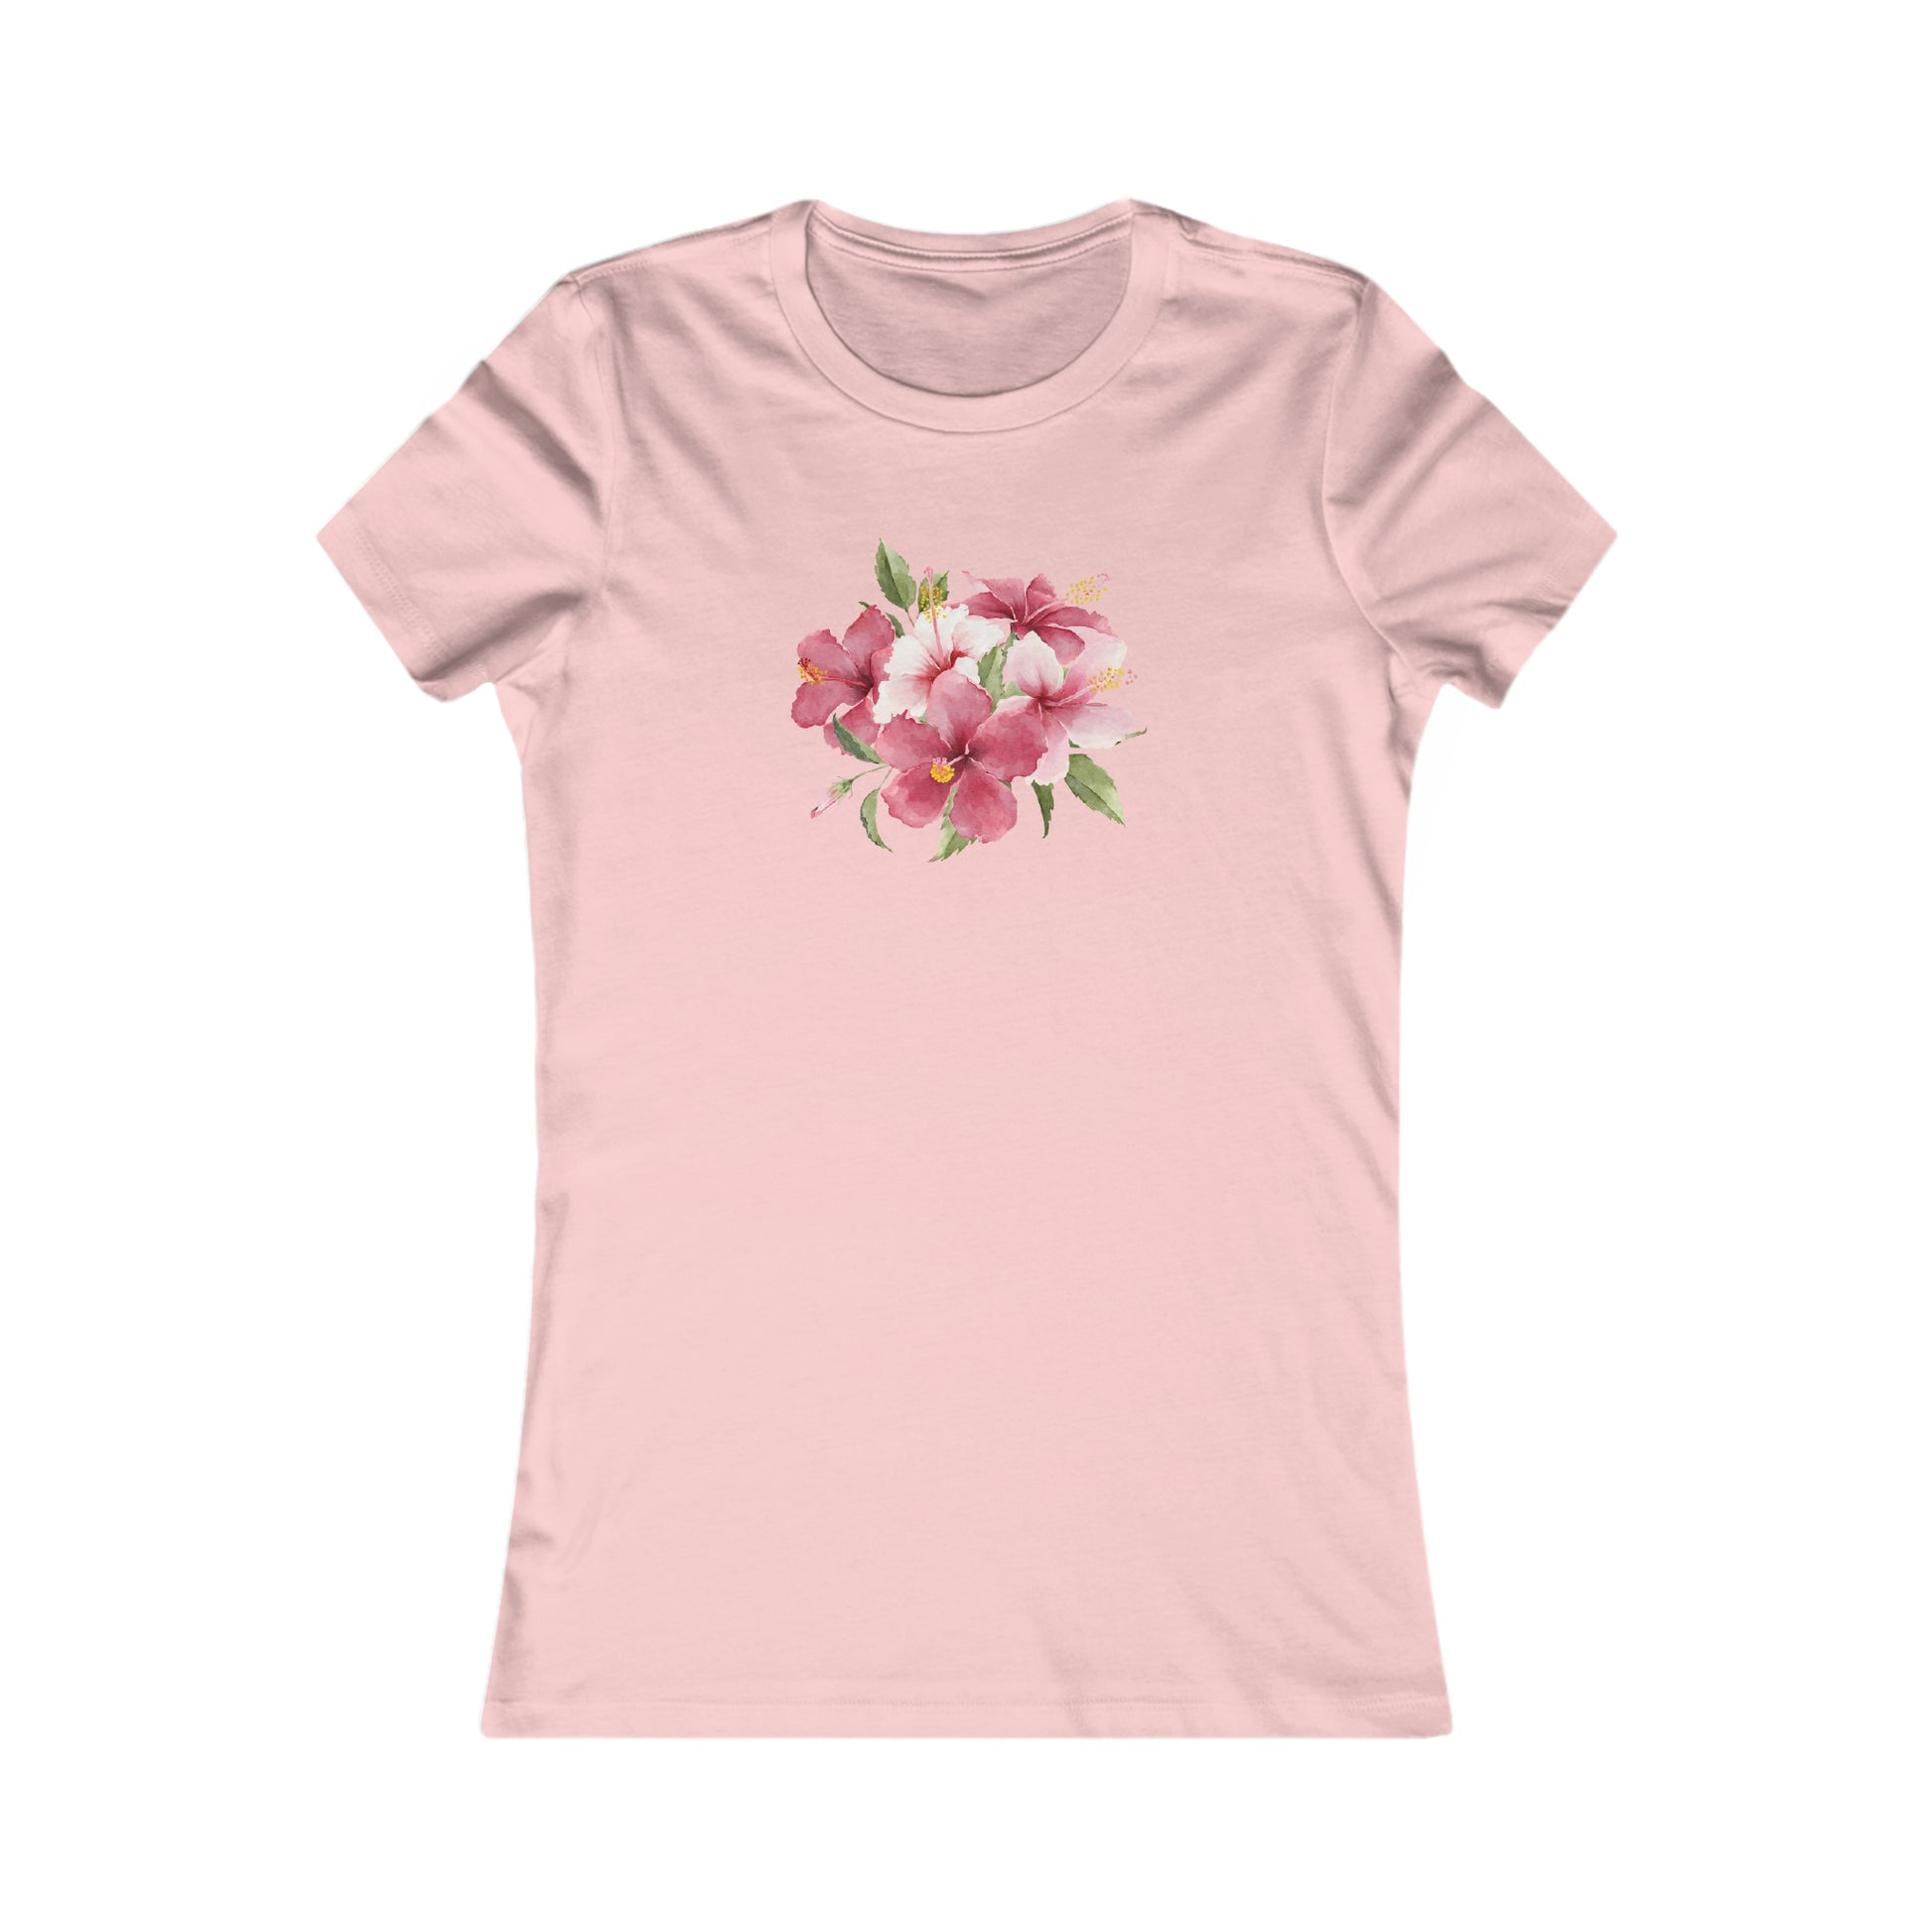 Flat front view of the pink t-shirt